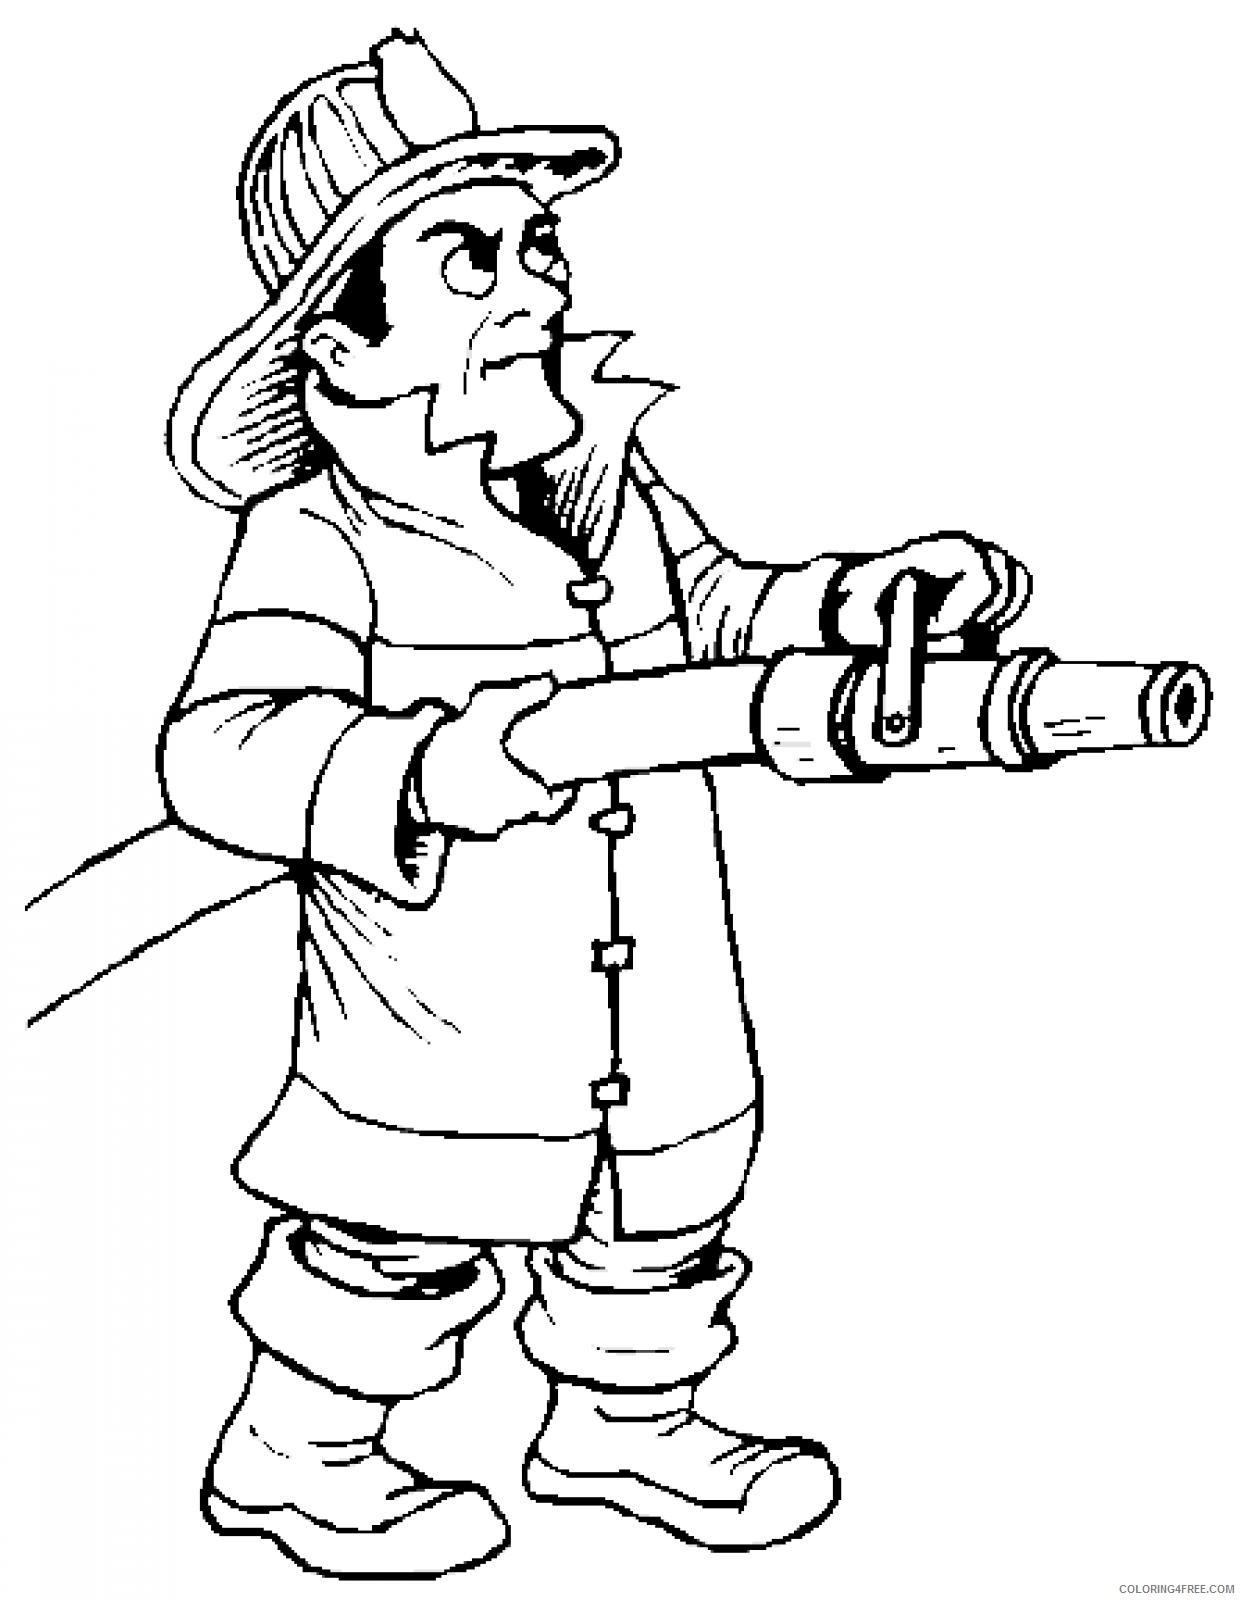 firefighter coloring pages free to print Coloring4free